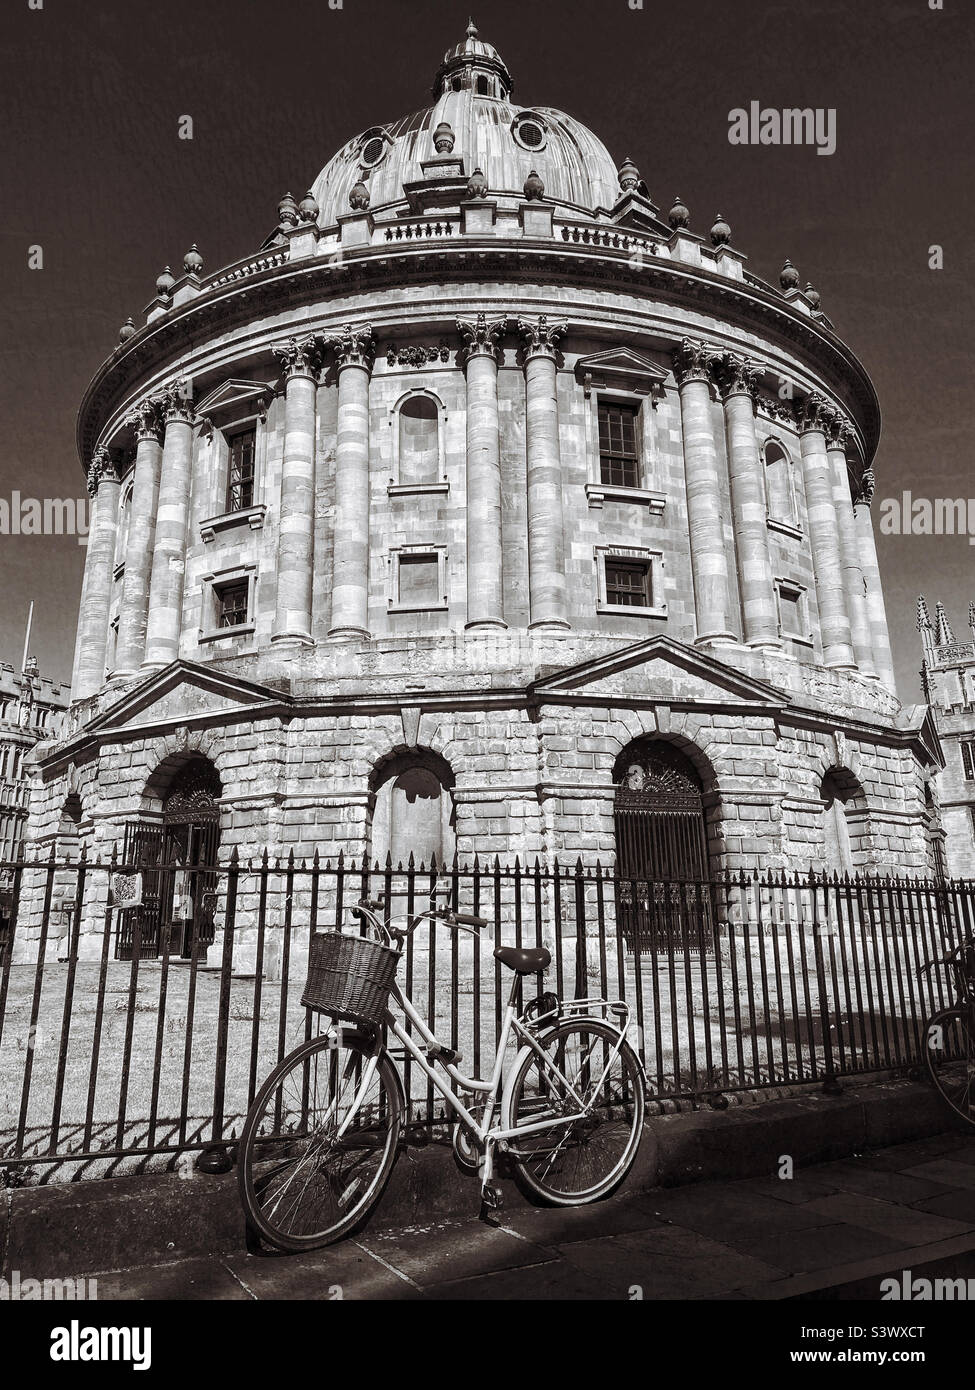 A bicycle is chained to the railings outside the Radcliffe Camera Building in Radcliffe Square, Oxford, England. This Palladian- style building is used as a library by students. Photo ©️ COLIN HOSKINS Stock Photo